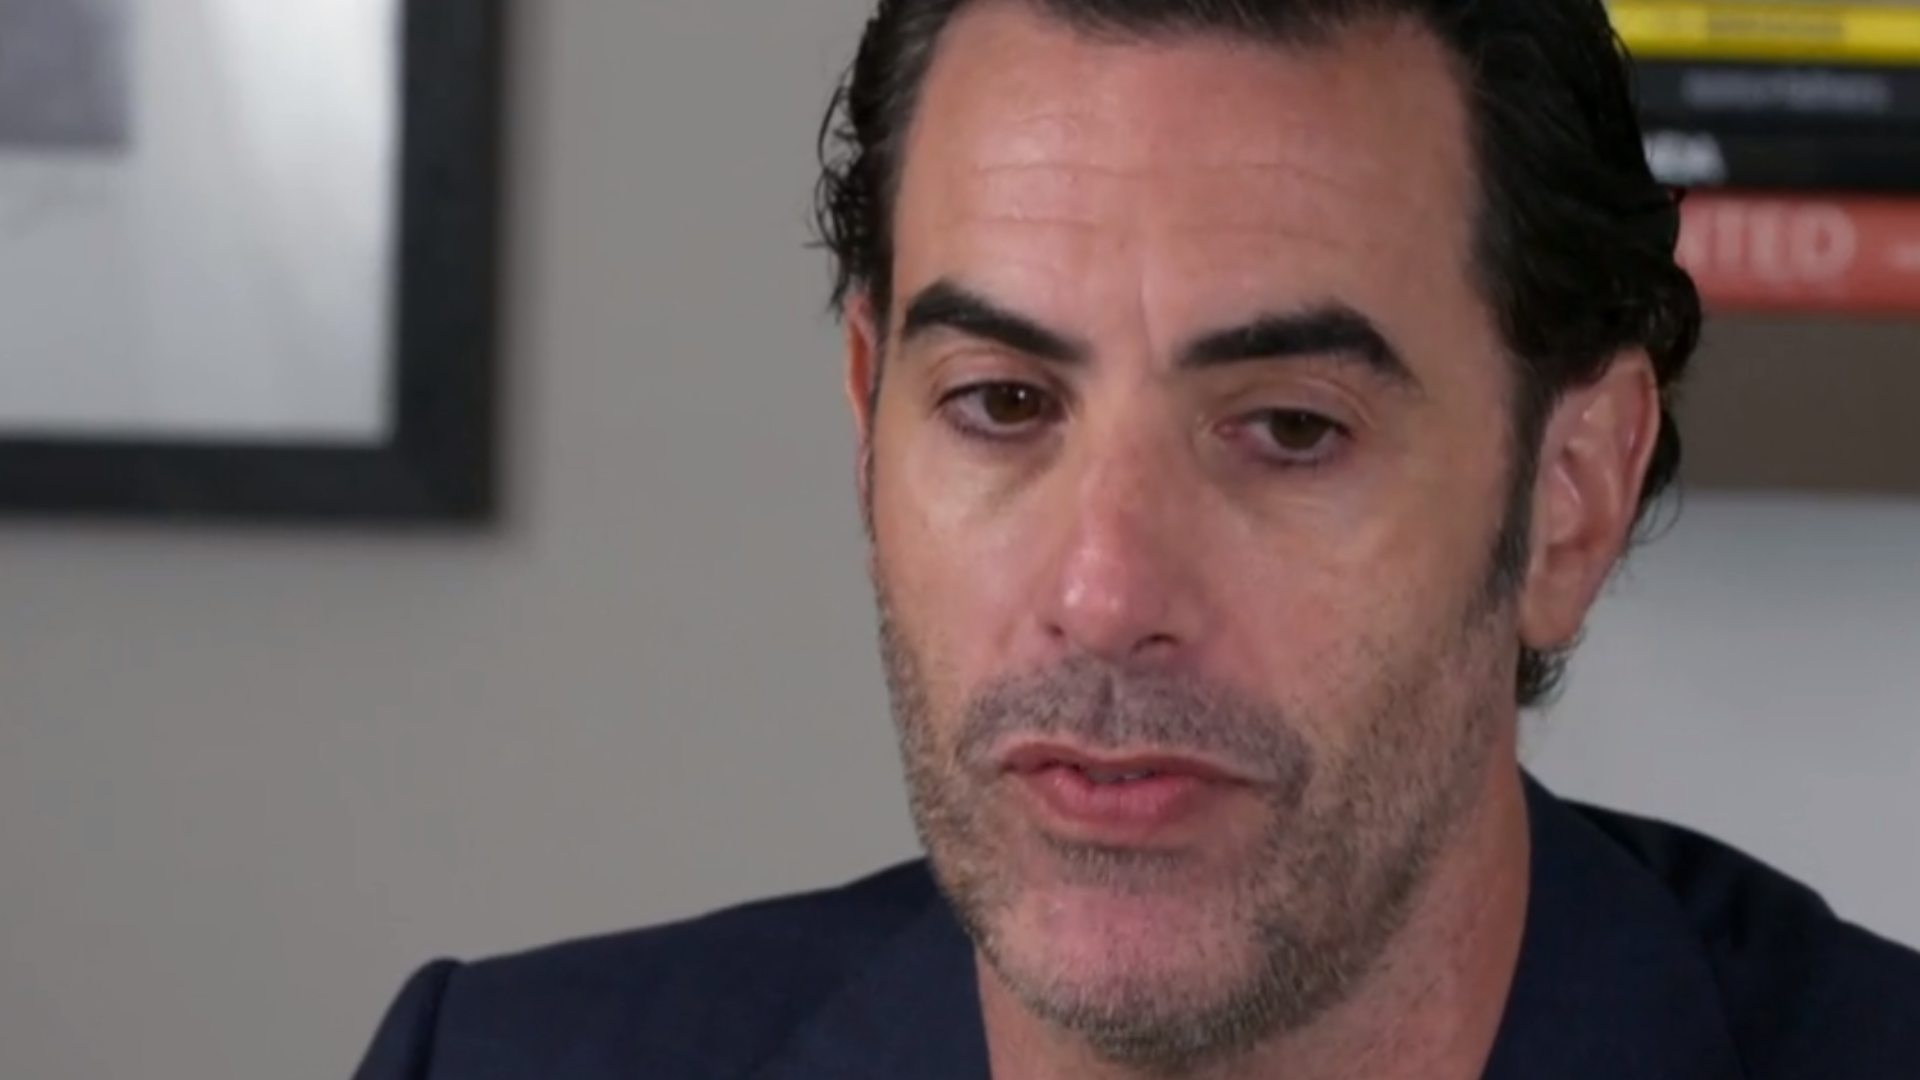 Sacha Baron Cohen on using comedy as "form of peaceful protest" 